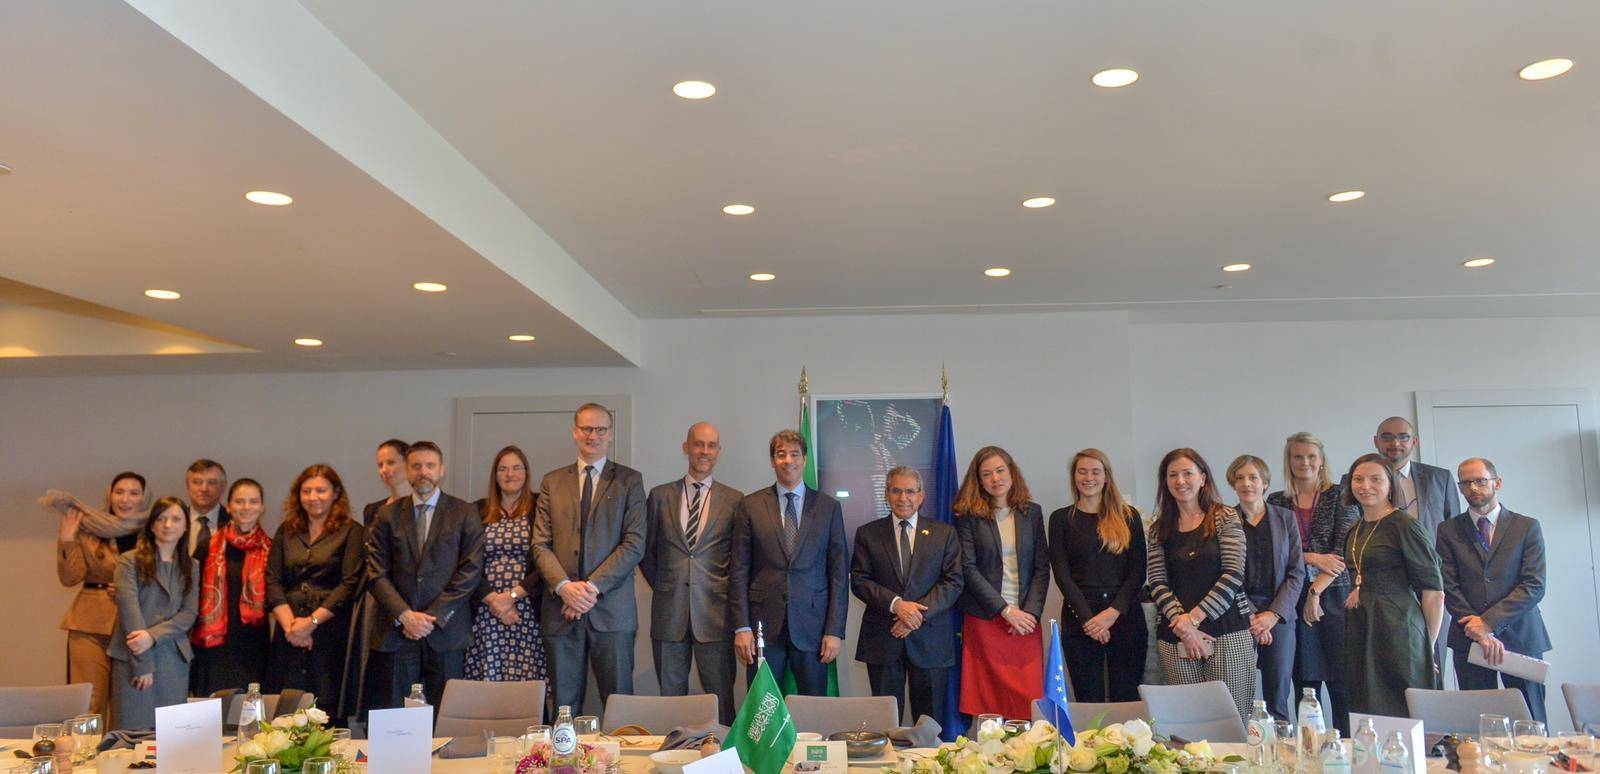 Saudi Human Rights Commission (HRC) President Dr. Awwad Al-Awwad addressing members of the Political and Security Committee of the European Union in Brussels. 